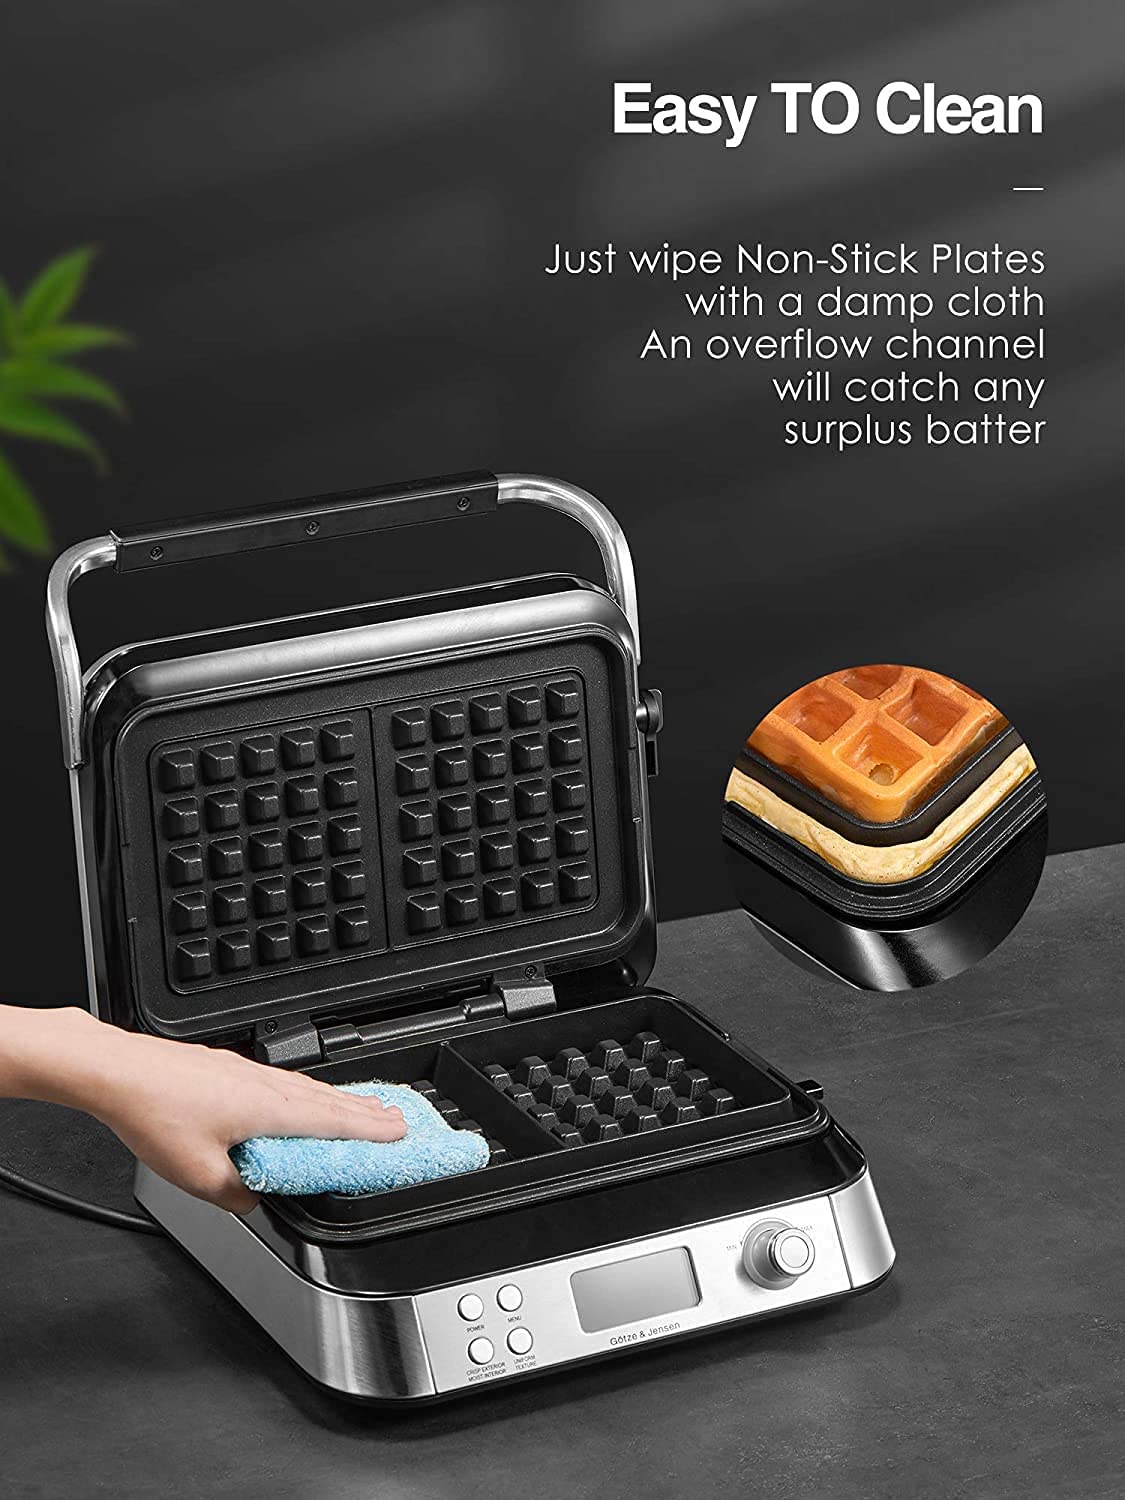 AICOOK | Smart Pro Waffle Iron with LCD Display, 5 Different Programs, 7 Browning Levels, Stainless Steel Easy Clean, Recipe, Silver